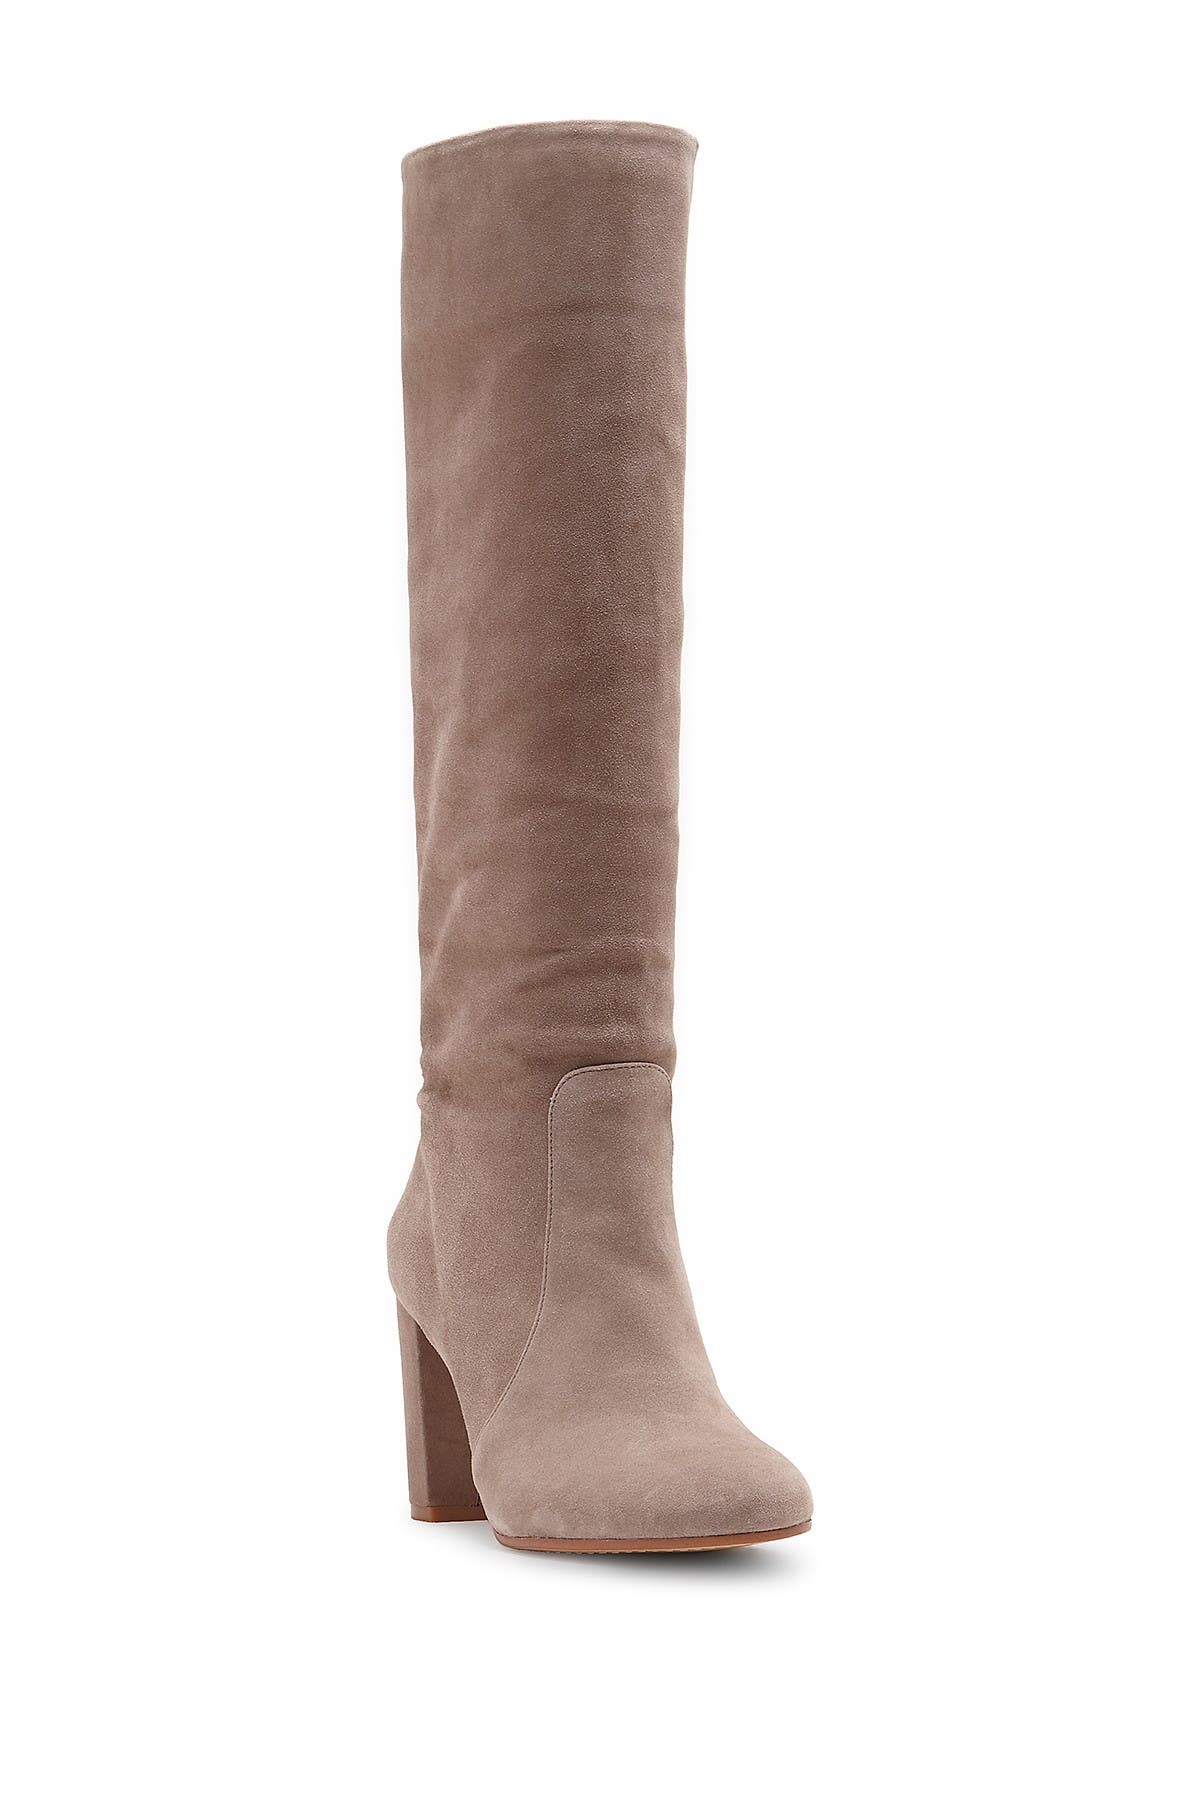 vince camuto tall suede boots